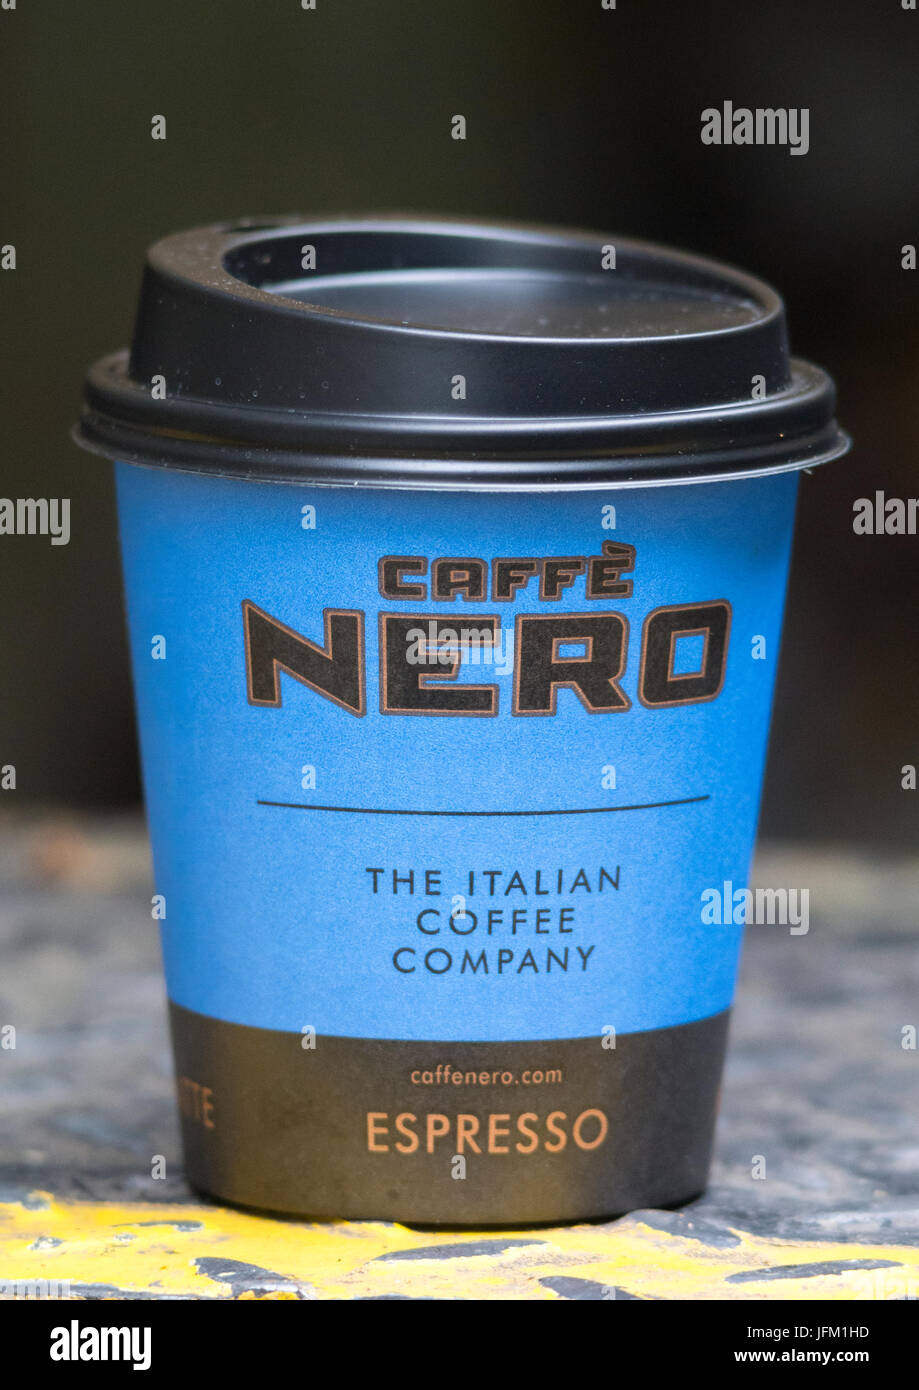 https://c8.alamy.com/comp/JFM1HD/cup-of-caffe-nero-coffee-to-take-away-caffe-nero-was-founded-in-1997-JFM1HD.jpg